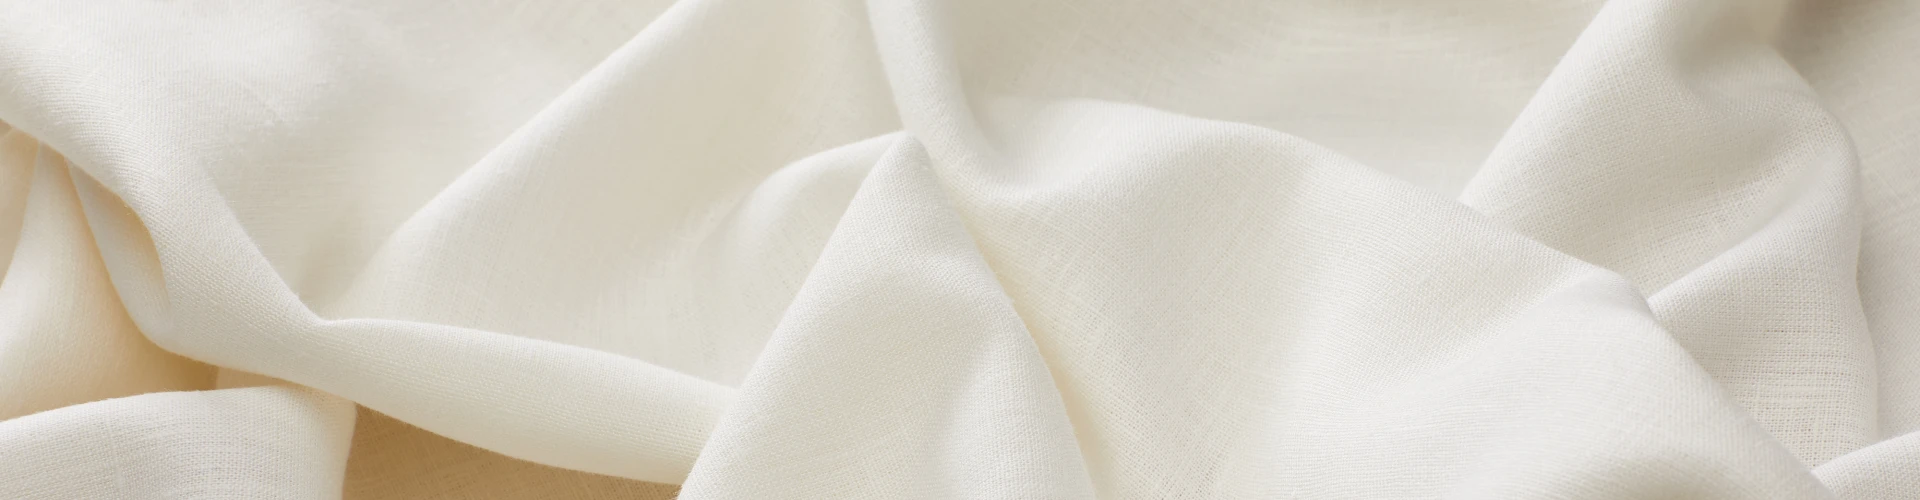 Cotton and linen fabrics 100% made in EU 